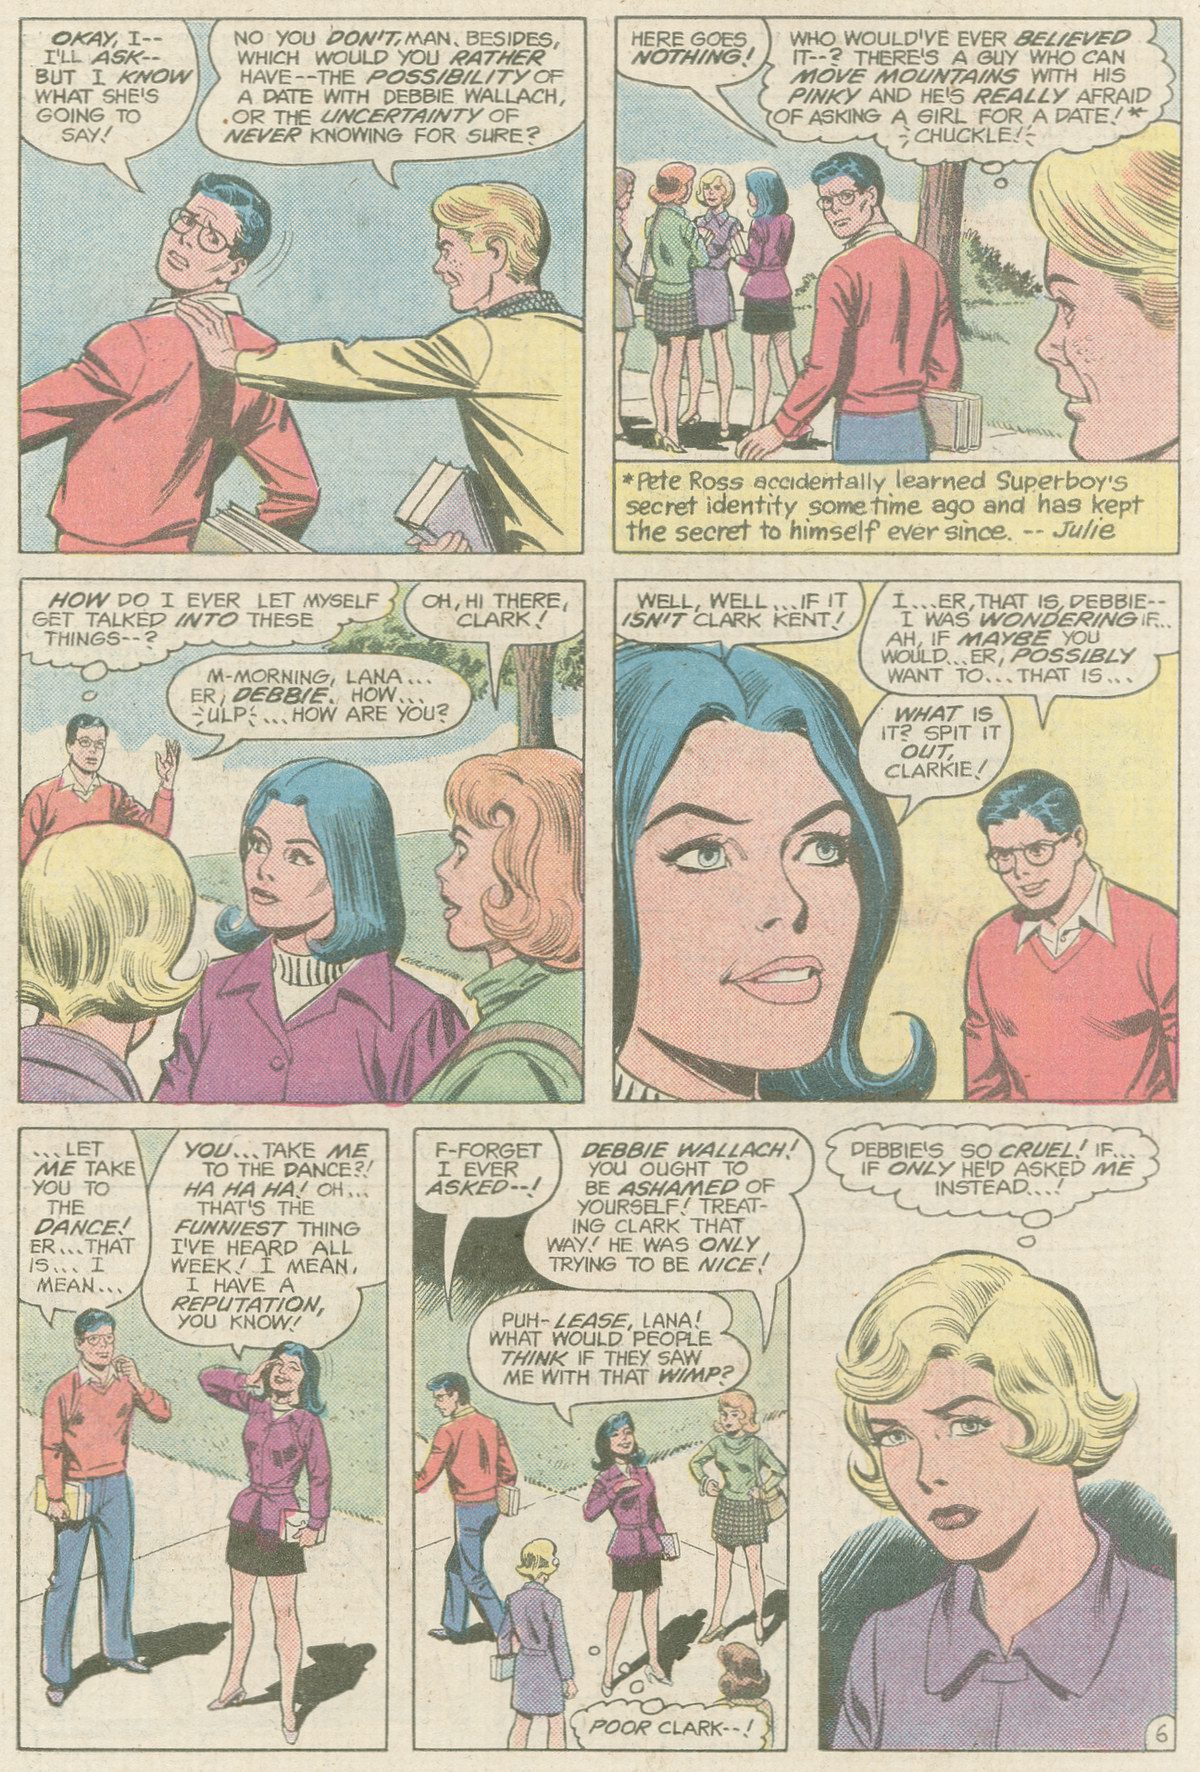 The New Adventures of Superboy 40 Page 6